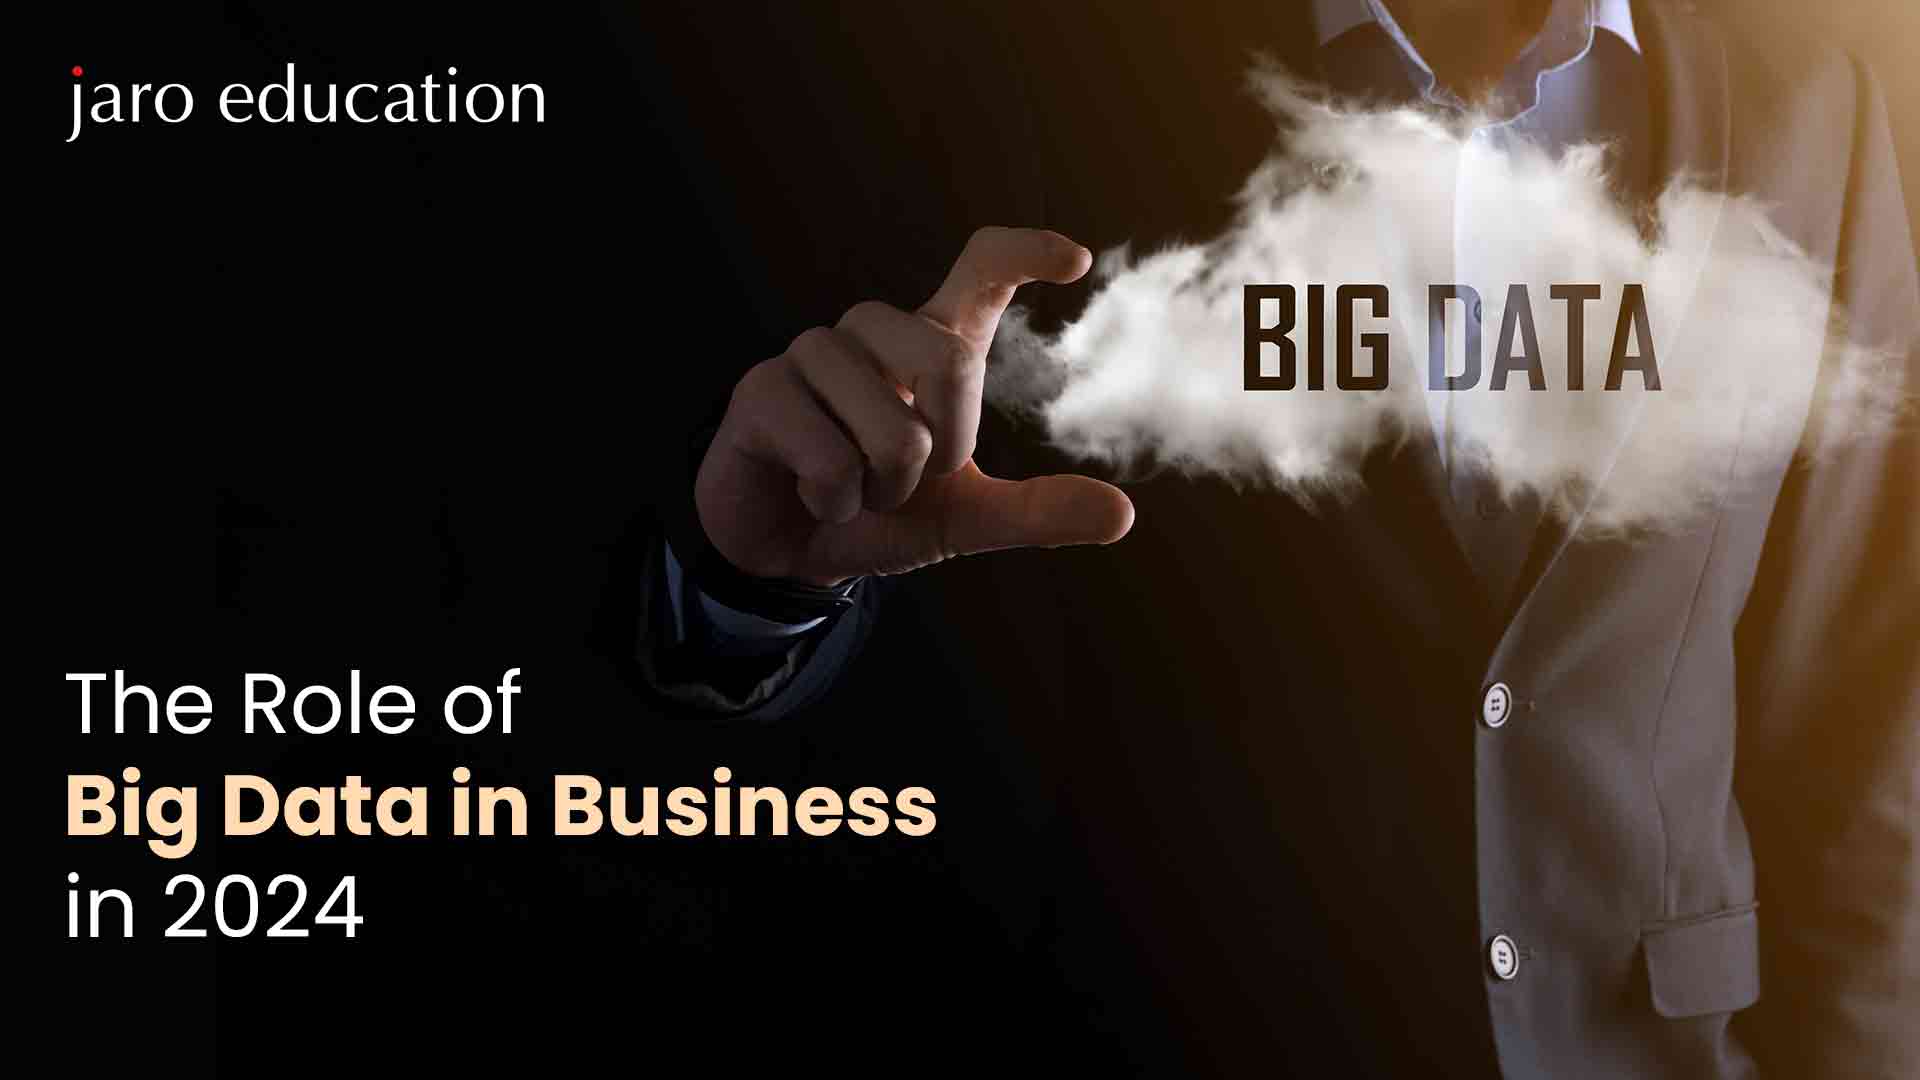 The Role of Big Data in Business in 2024